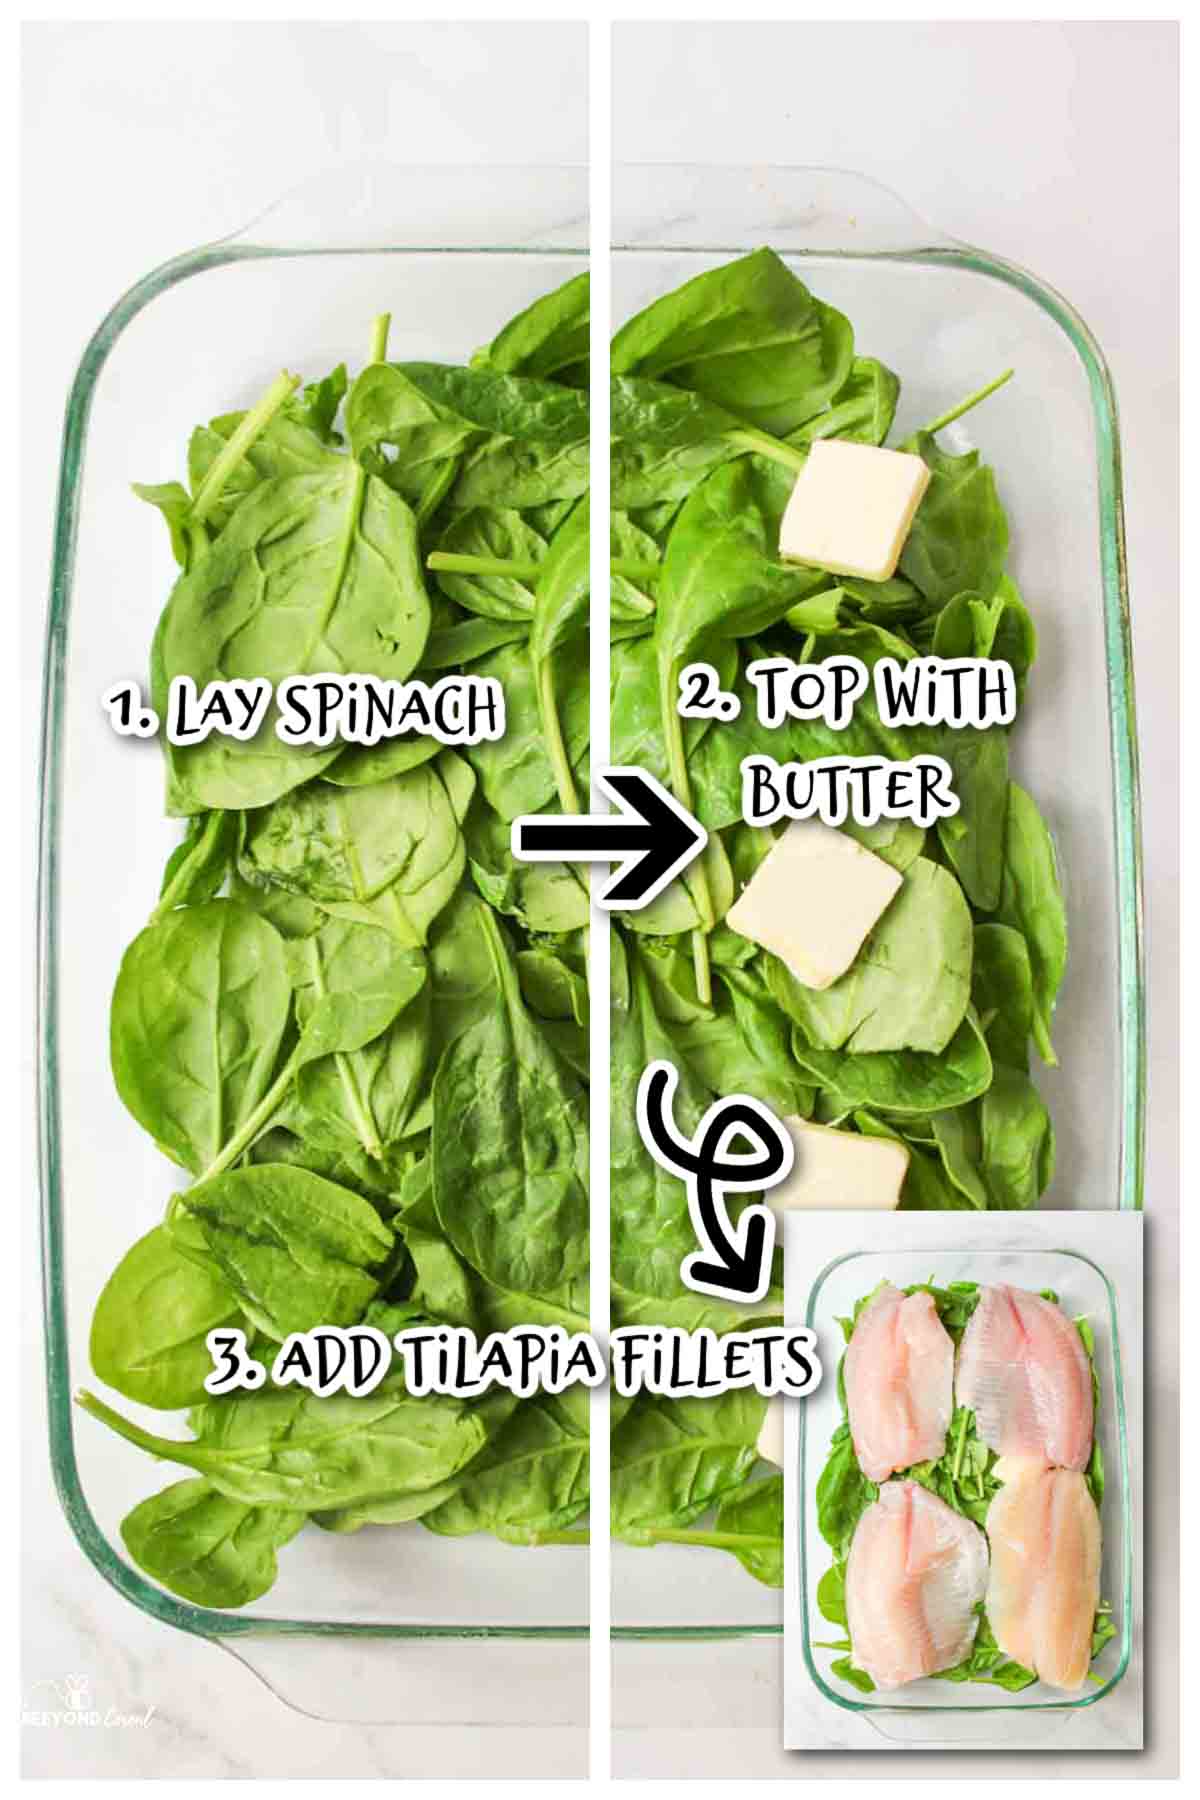 first 3 steps to make the tilapia dinner, add spinach to baking dish, top with butter, and then add tilapia fillets